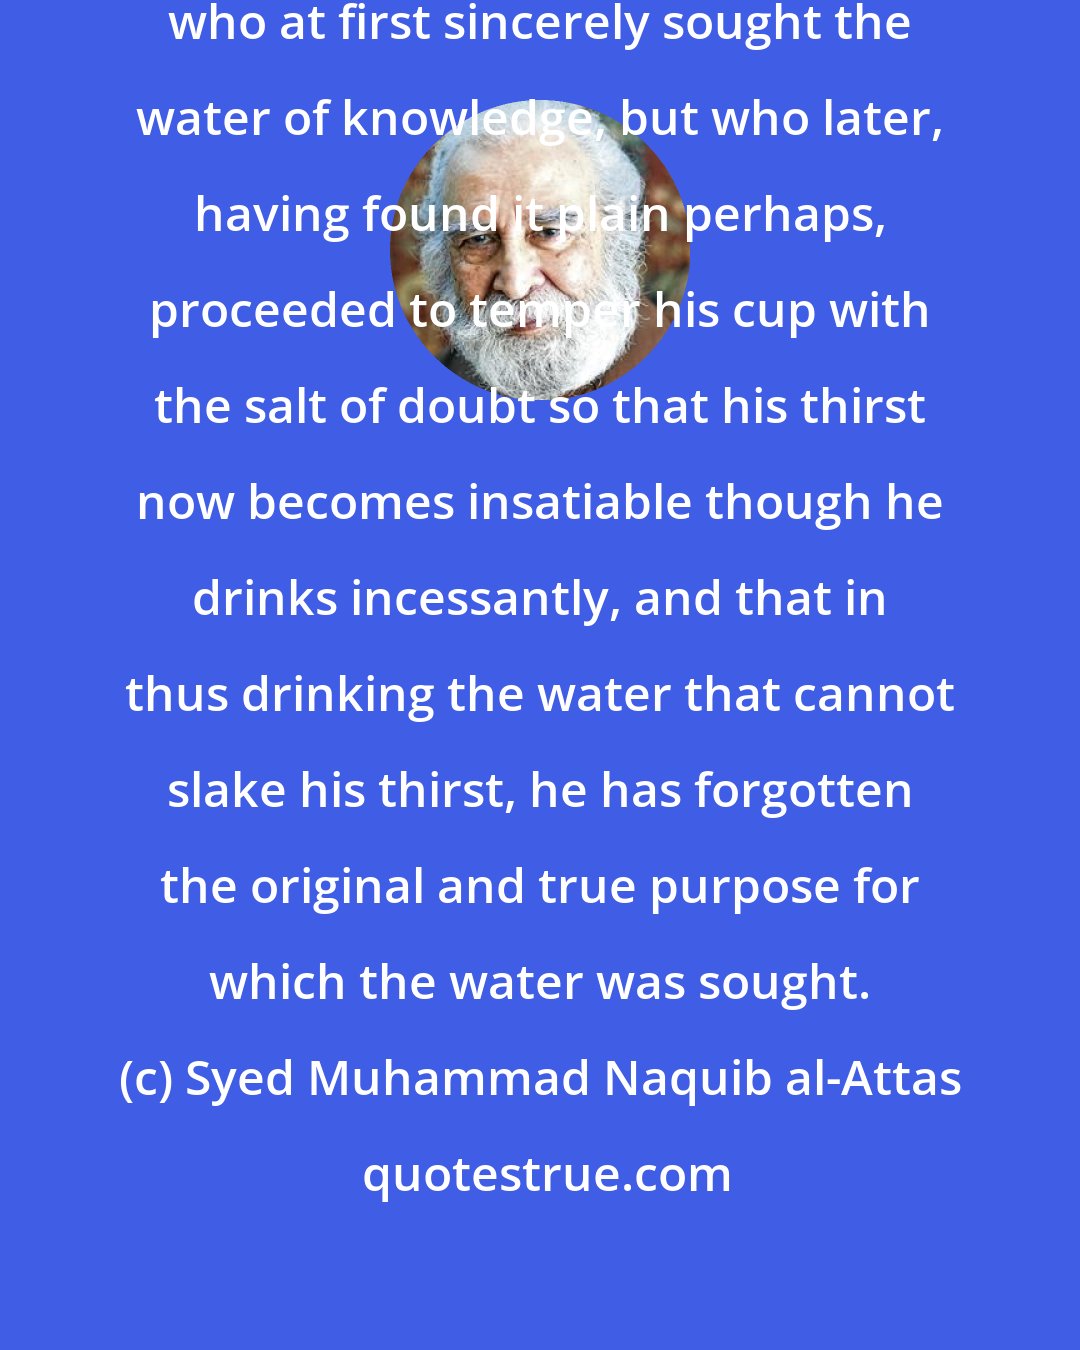 Syed Muhammad Naquib al-Attas: It is like the thirsty traveller who at first sincerely sought the water of knowledge, but who later, having found it plain perhaps, proceeded to temper his cup with the salt of doubt so that his thirst now becomes insatiable though he drinks incessantly, and that in thus drinking the water that cannot slake his thirst, he has forgotten the original and true purpose for which the water was sought.